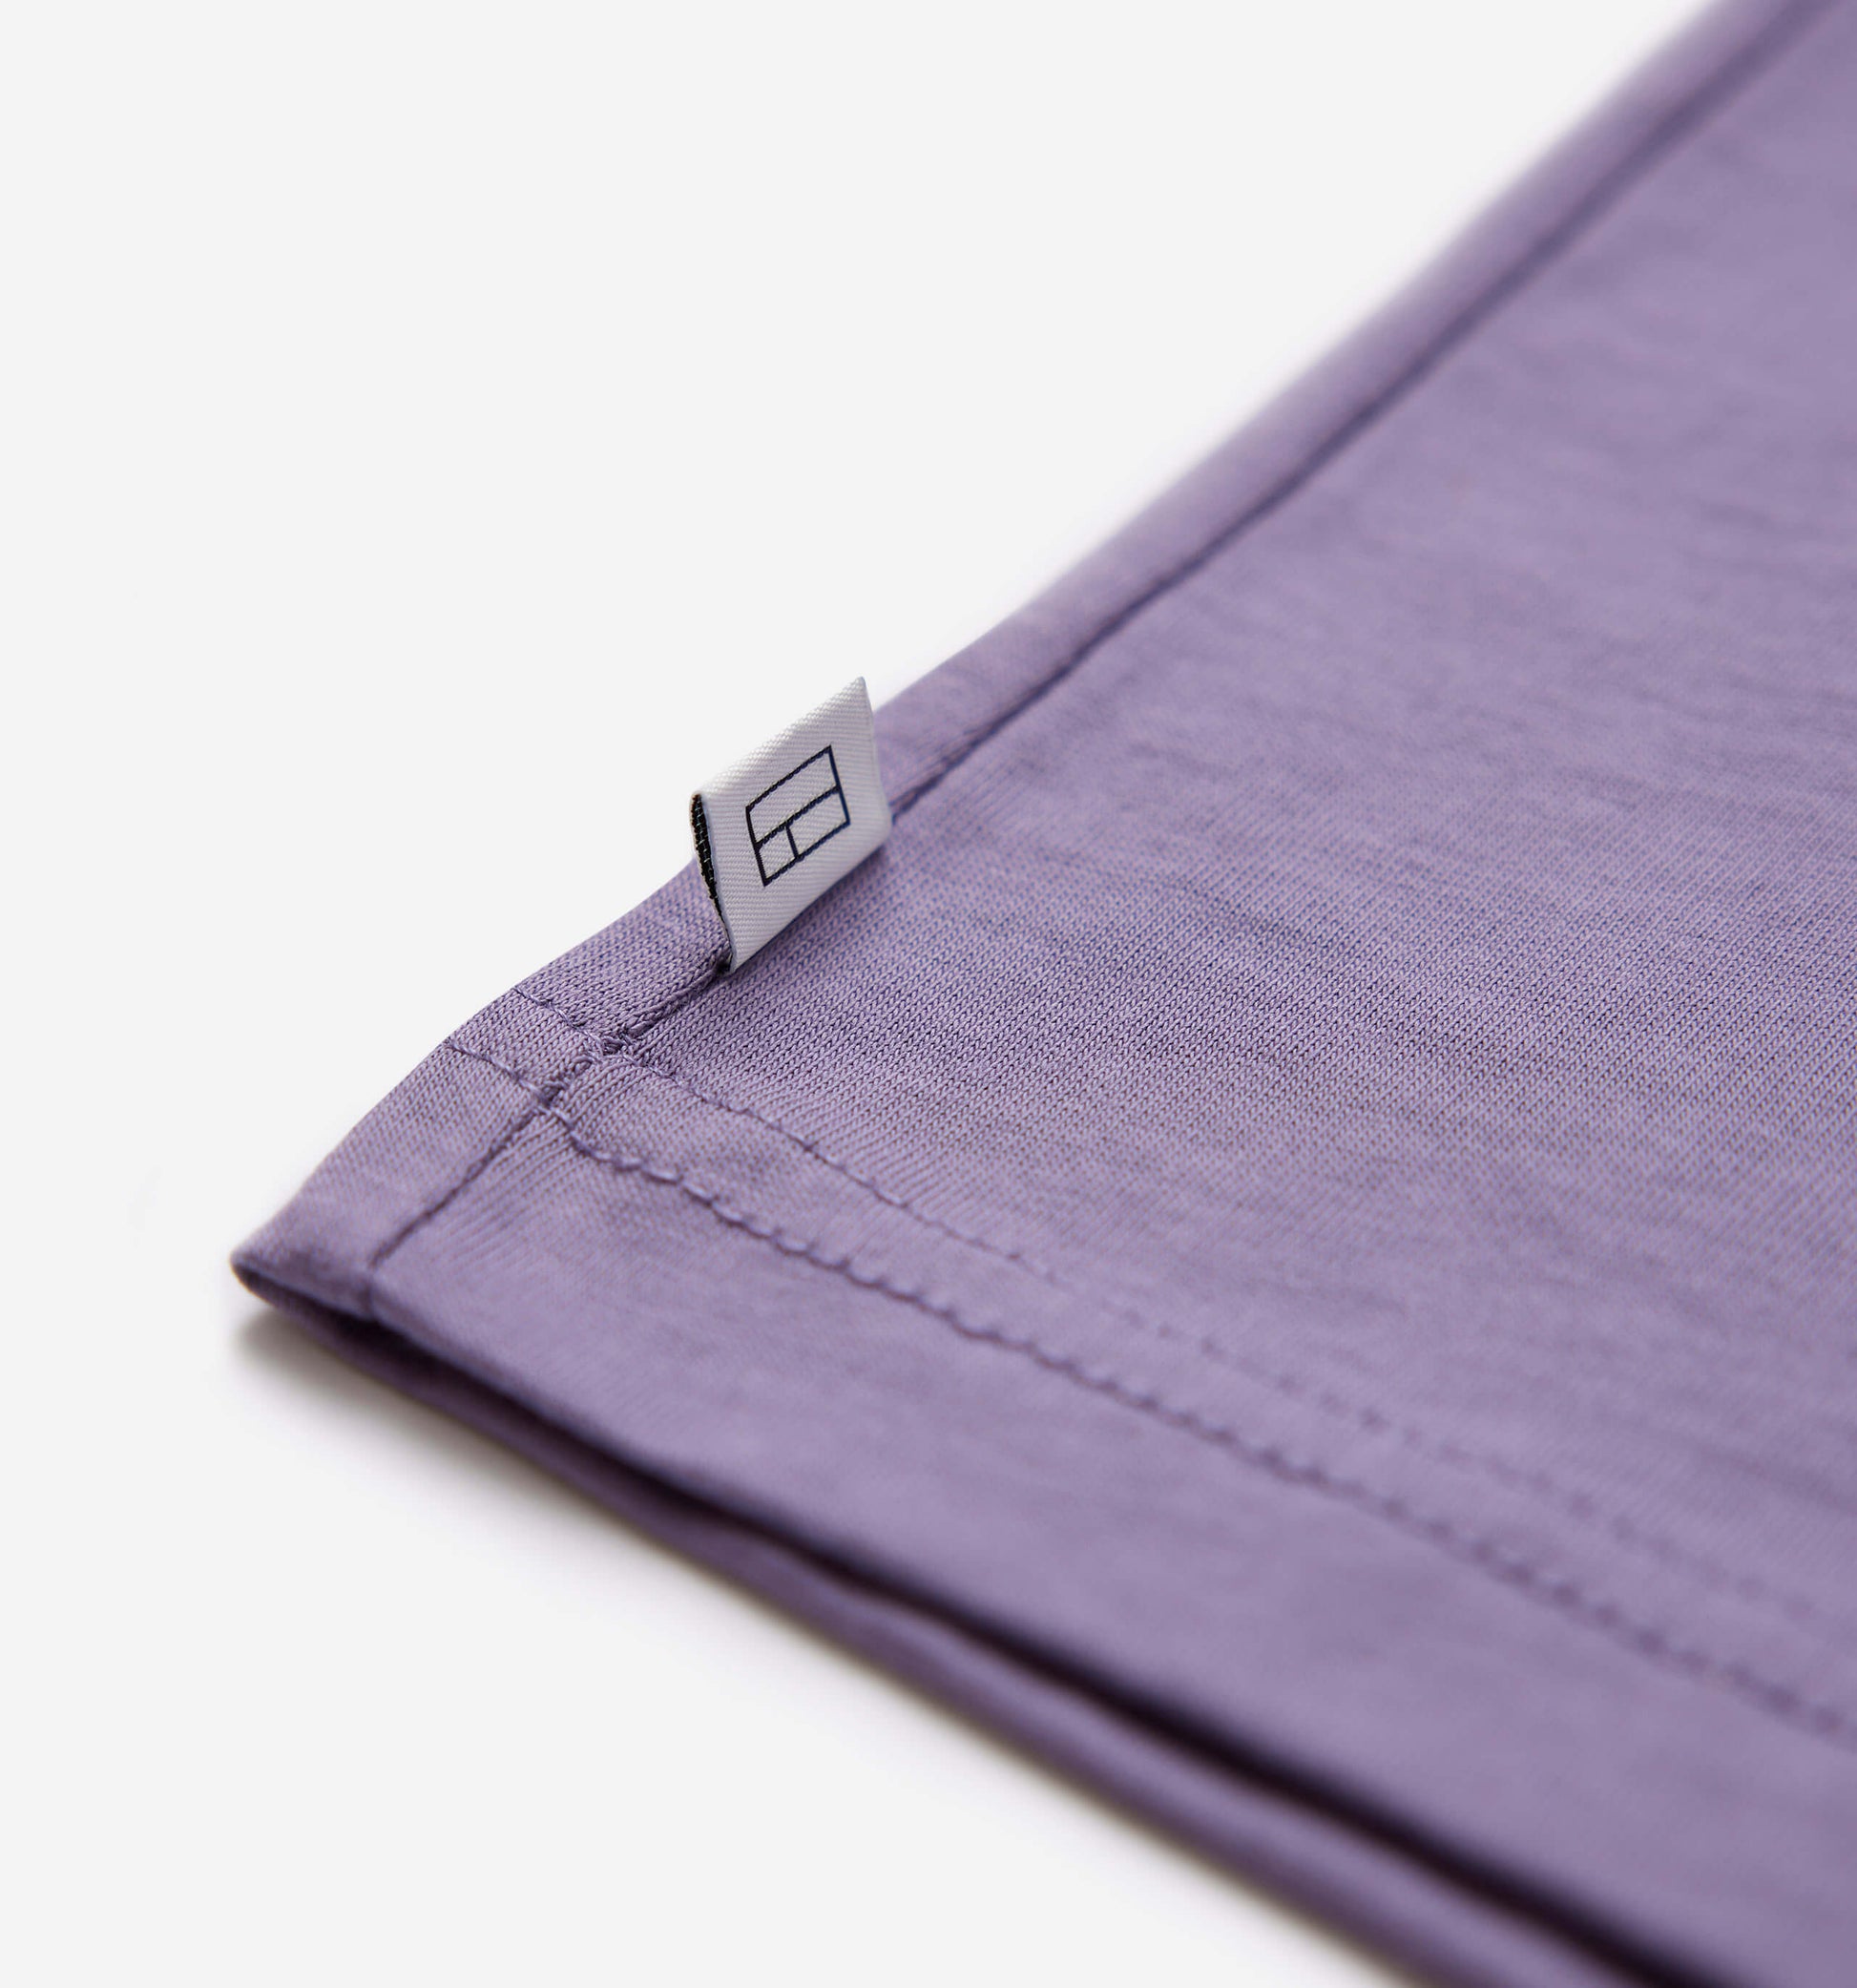 The Steve - Basic Cotton T-shirt In Light Purple From King Essentials